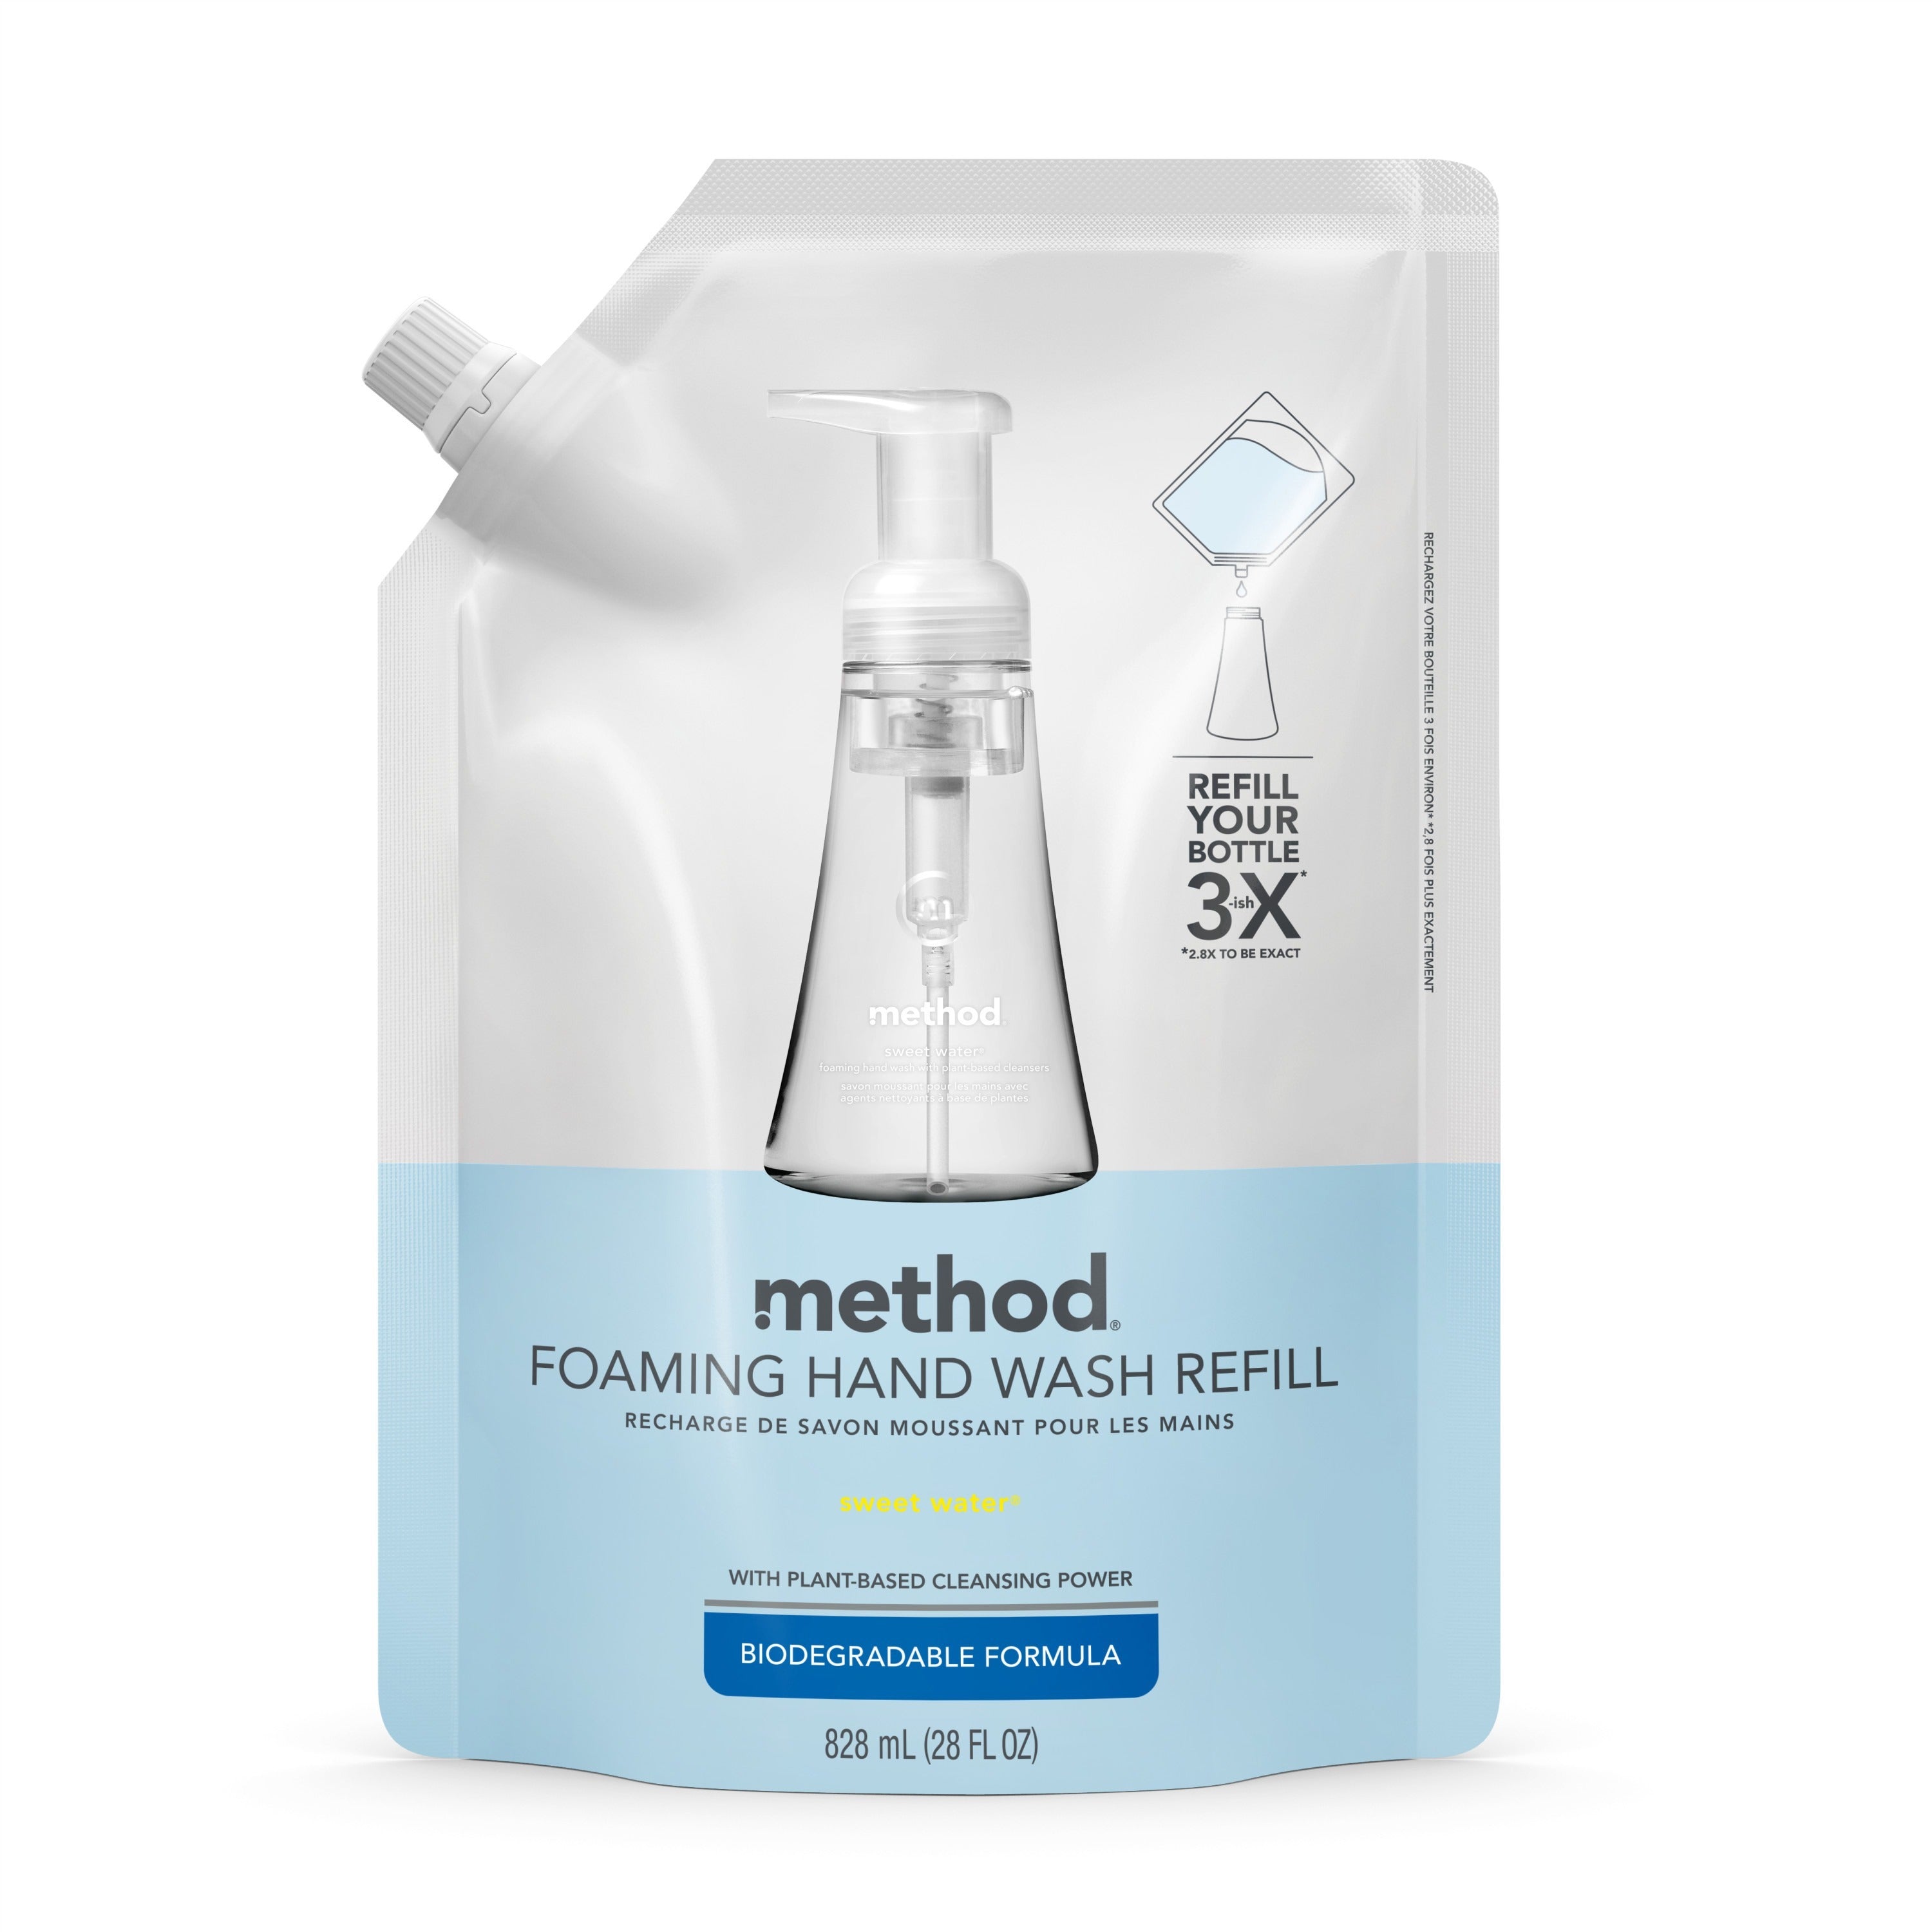 method-foaming-hand-soap-refill-sweet-water-scentfor-28-fl-oz-8281-ml-hand-clear-triclosan-free-1-each_mth00662 - 1